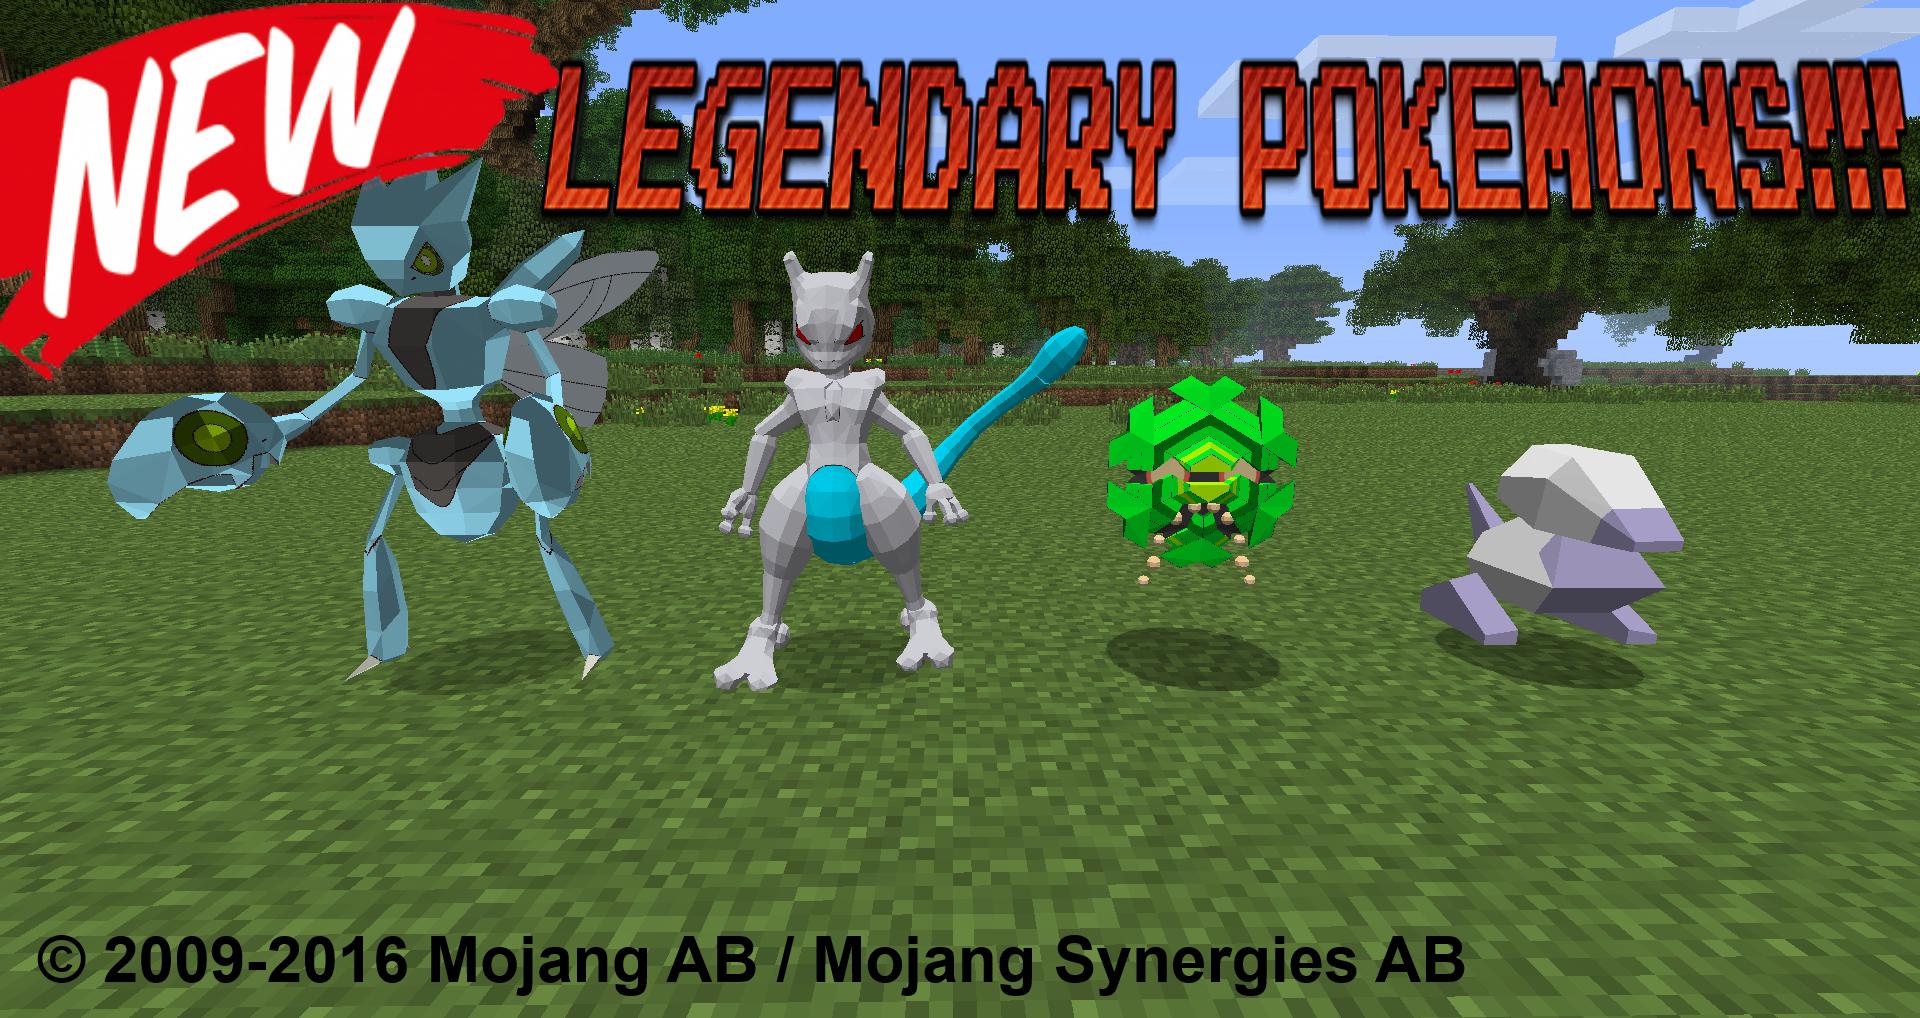 Pixelmon Mod For Minecraft For Android - APK Download